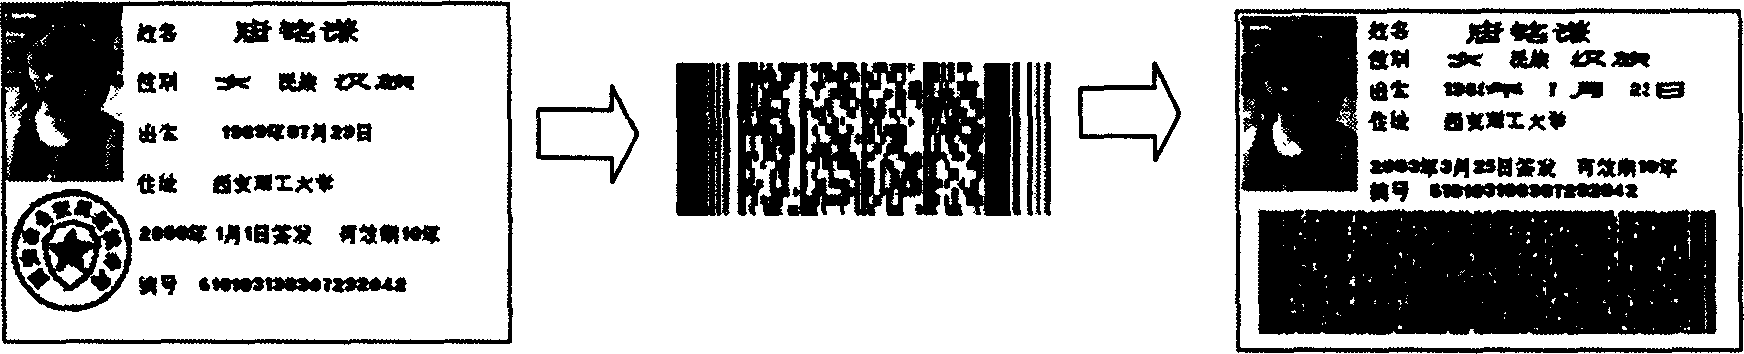 Automatic identification for double dimension barcode personal certificate antifakery system